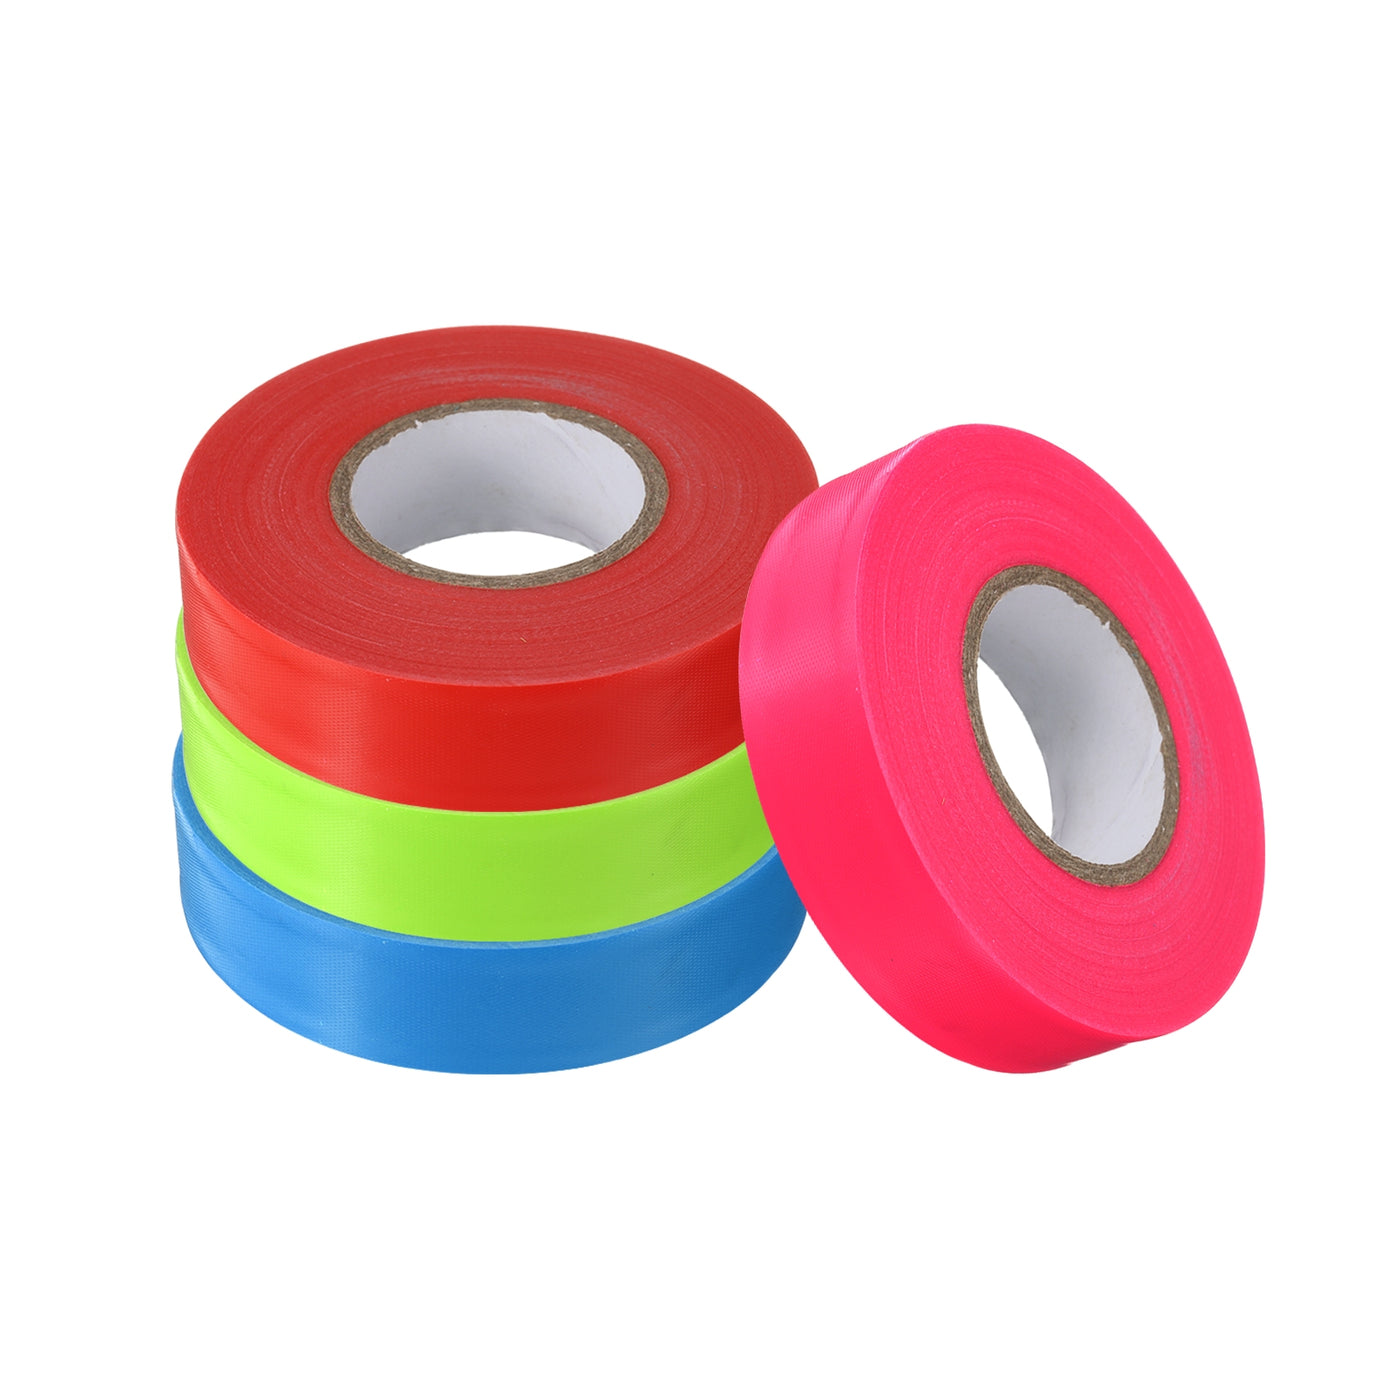 uxcell Uxcell PVC Flagging Tape 20mm x 60m/196.8ft Marking Tape Non-Adhesive 4pcs